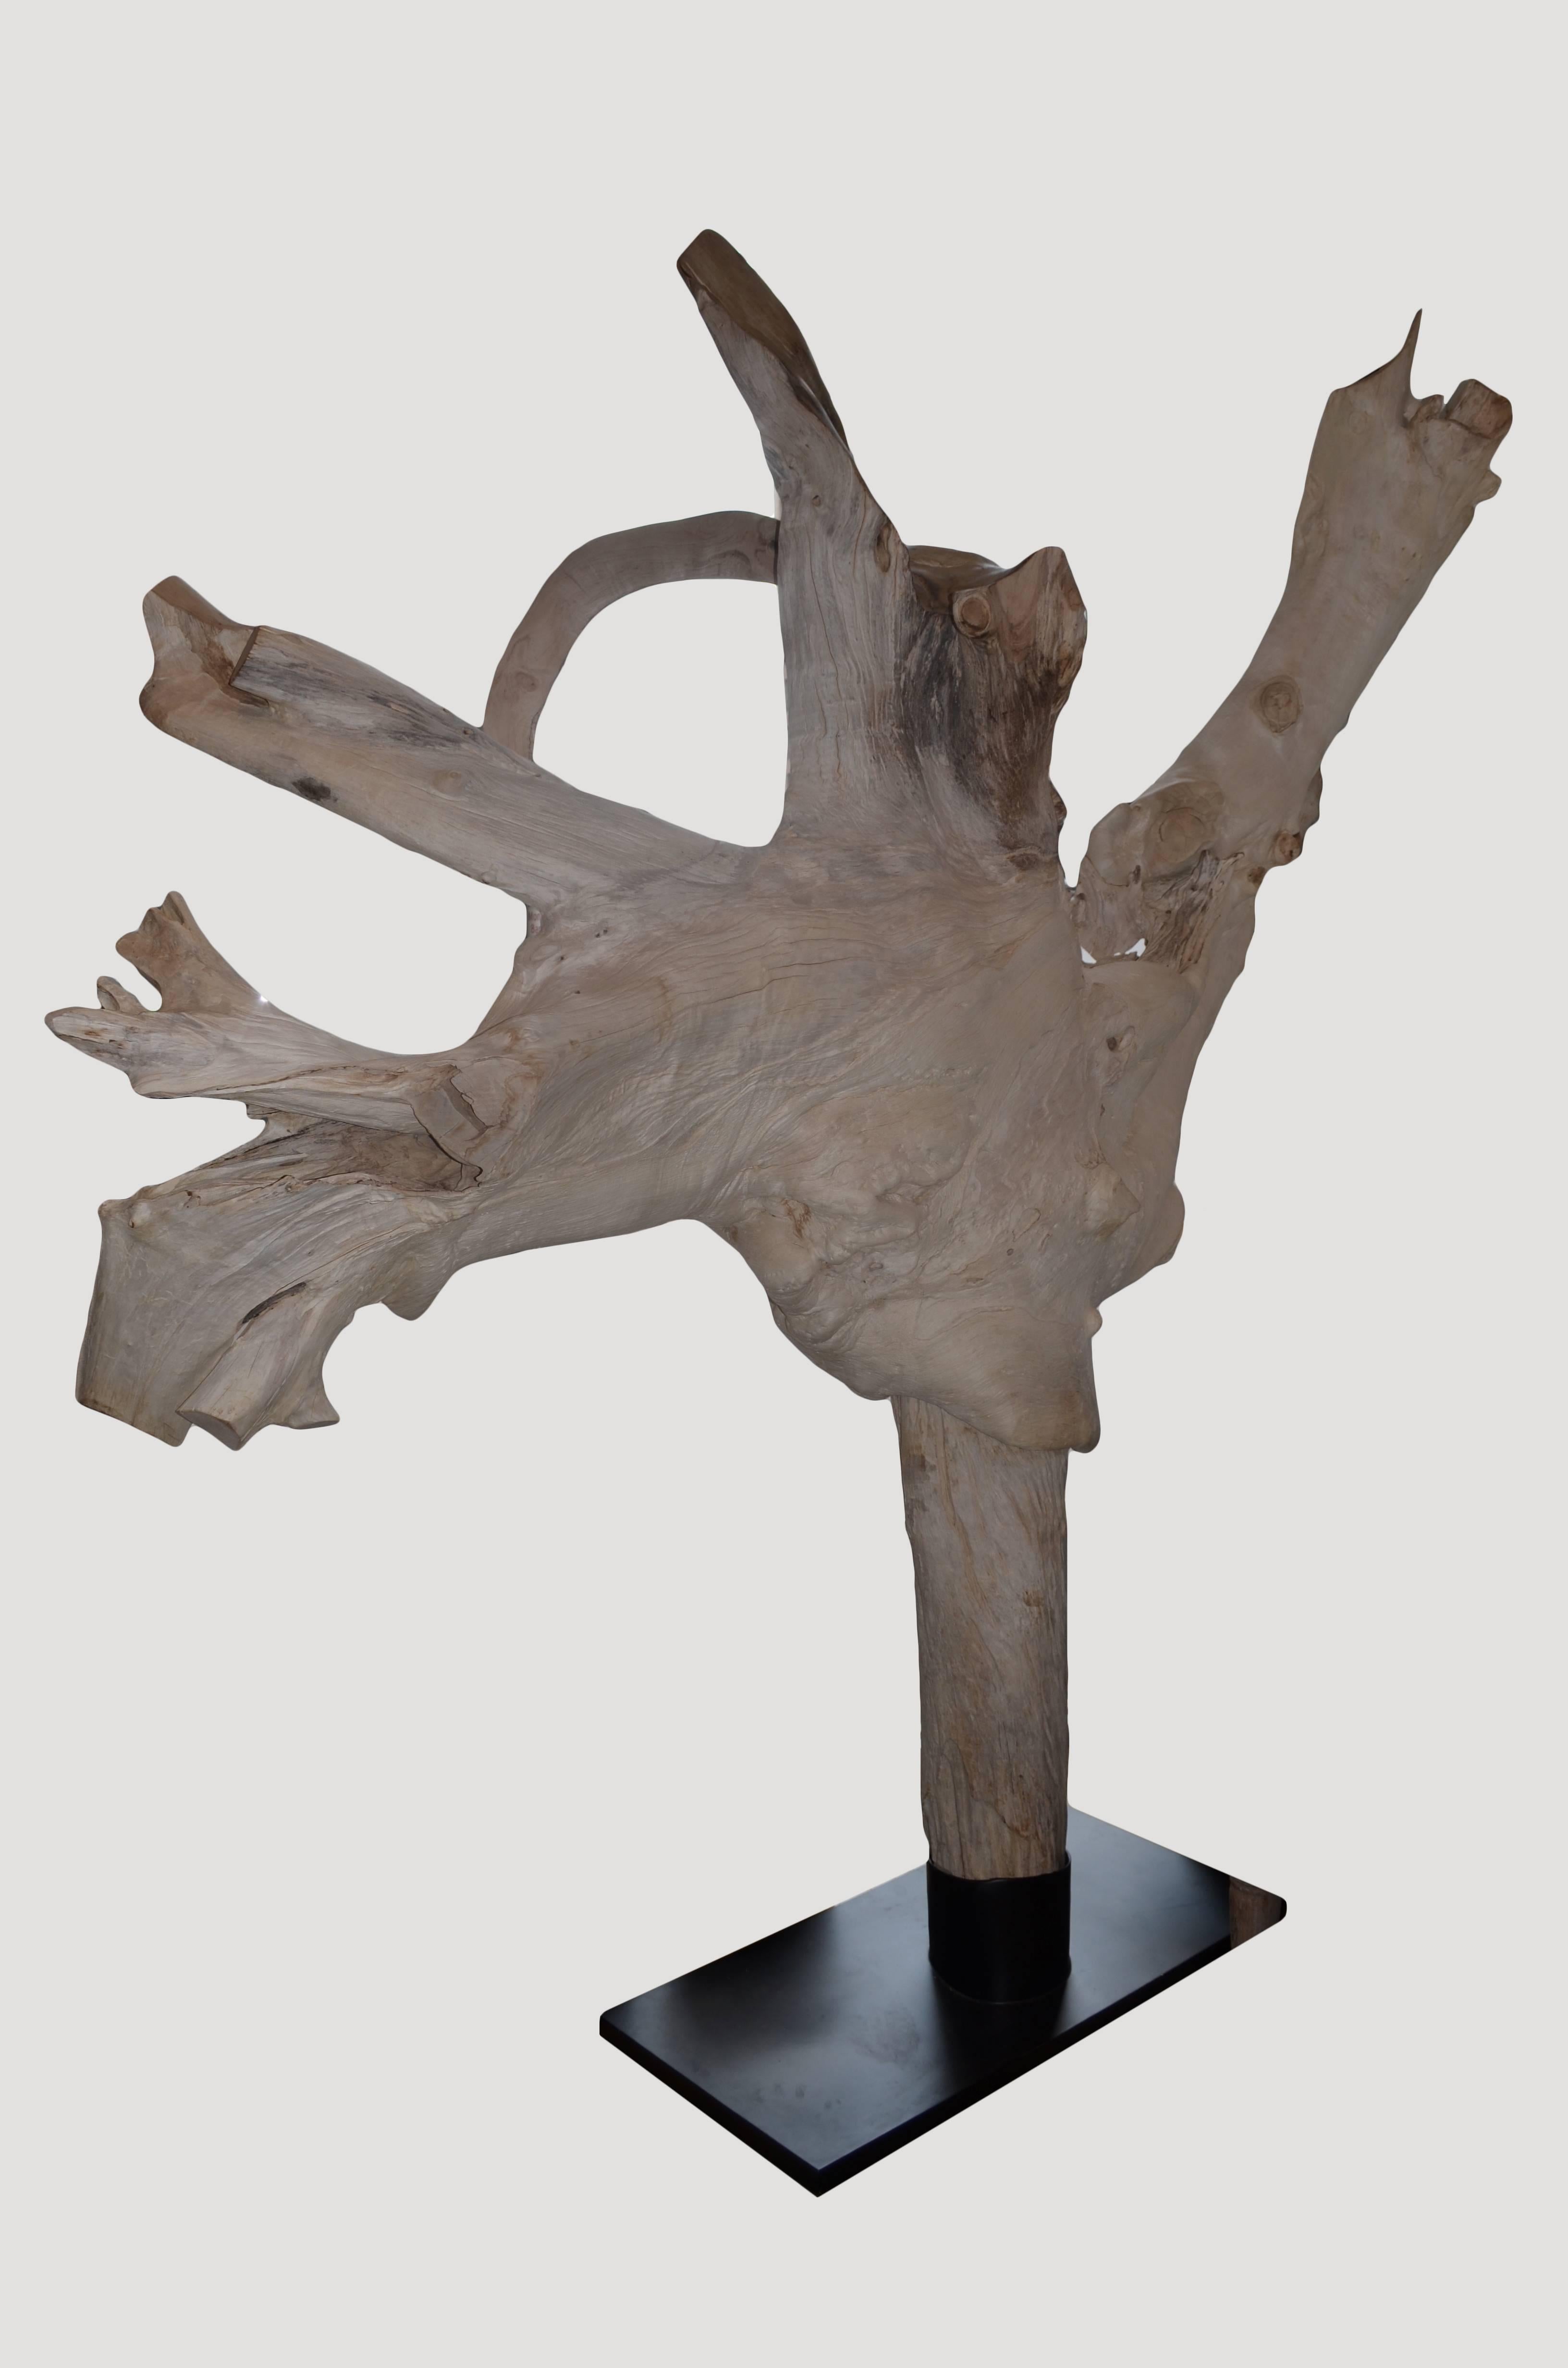 Beautifully carved sculpture made from one piece of teak wood. This enormous teak root was bleached and left in the sun for over a year. We then sanded the smooth sections and added a light shellac. Set on a modern black steel stand. Fabulous for a